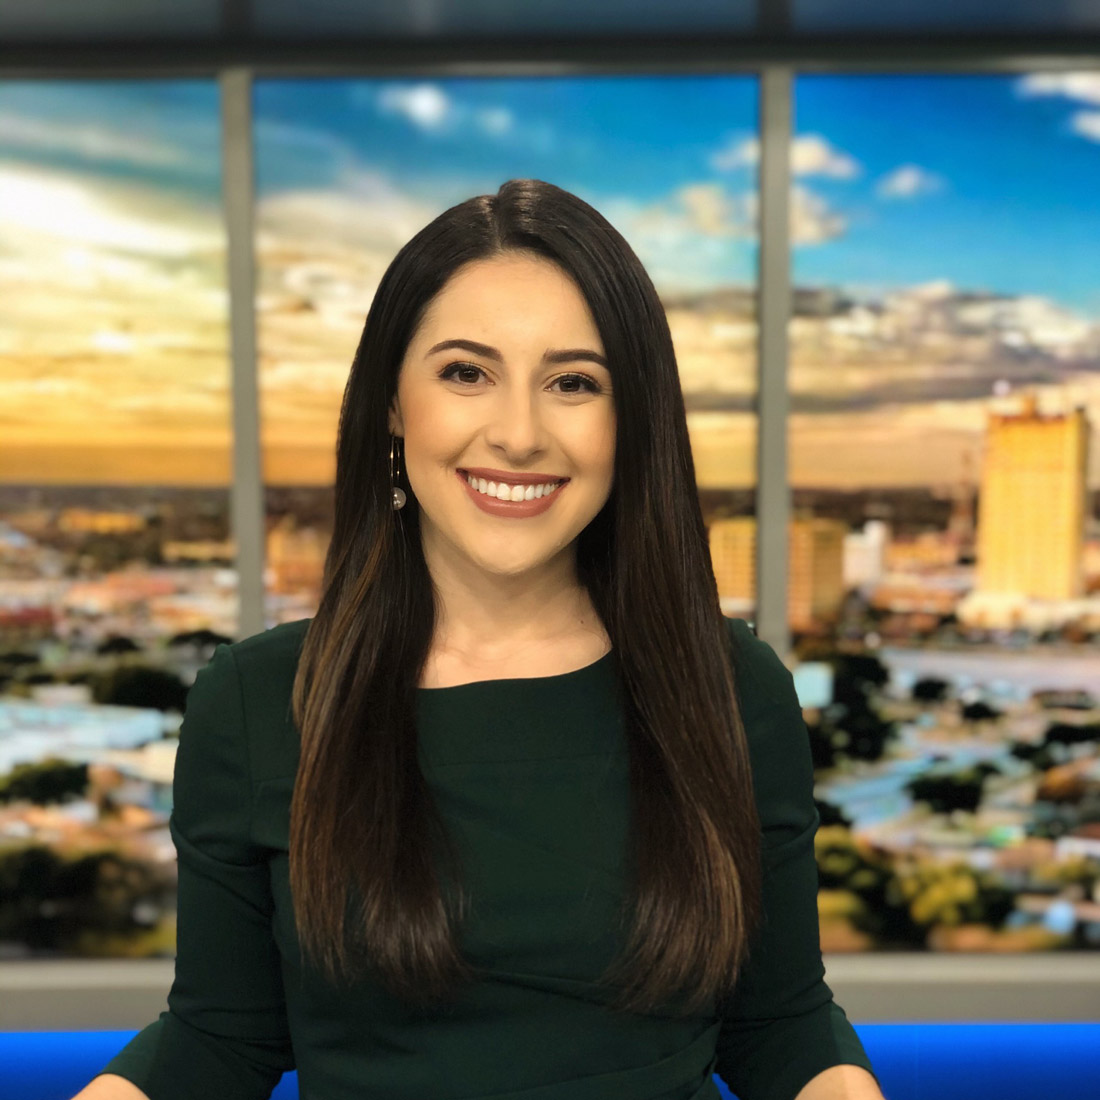 Photo of a female news reporter wearing a dark green dress and smiling in front of a city background